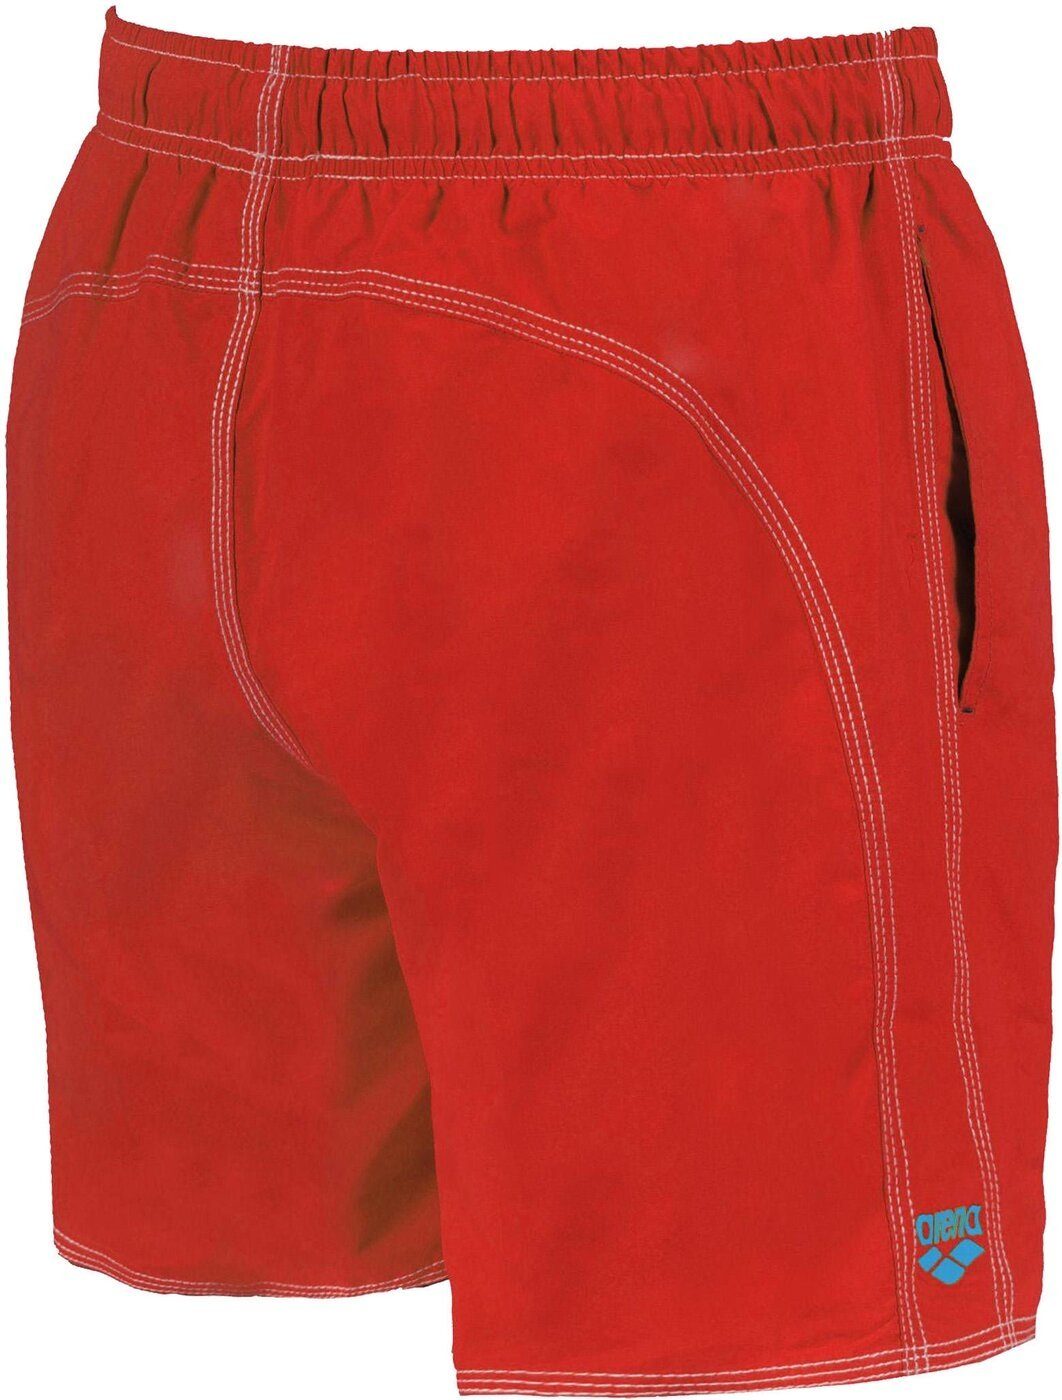 Arena Badeshorts SOLID RED-TURQUOISE BOXER FUNDAMENTALS 48